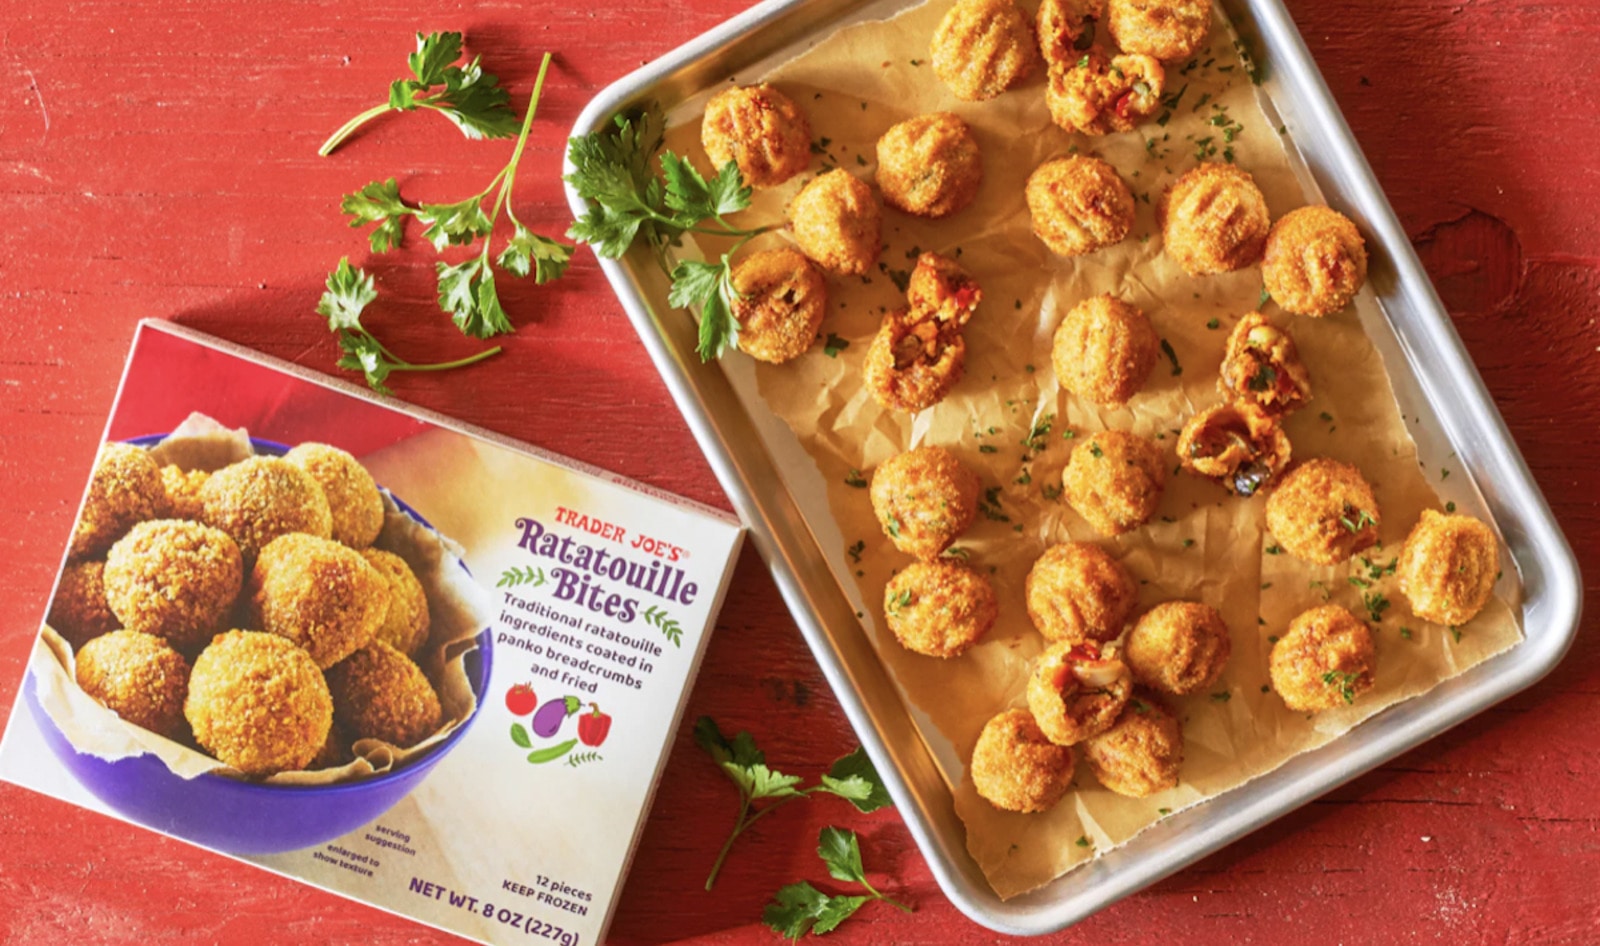 13 Trader Joe’s Must-Haves for Your Vegan Game Day Party